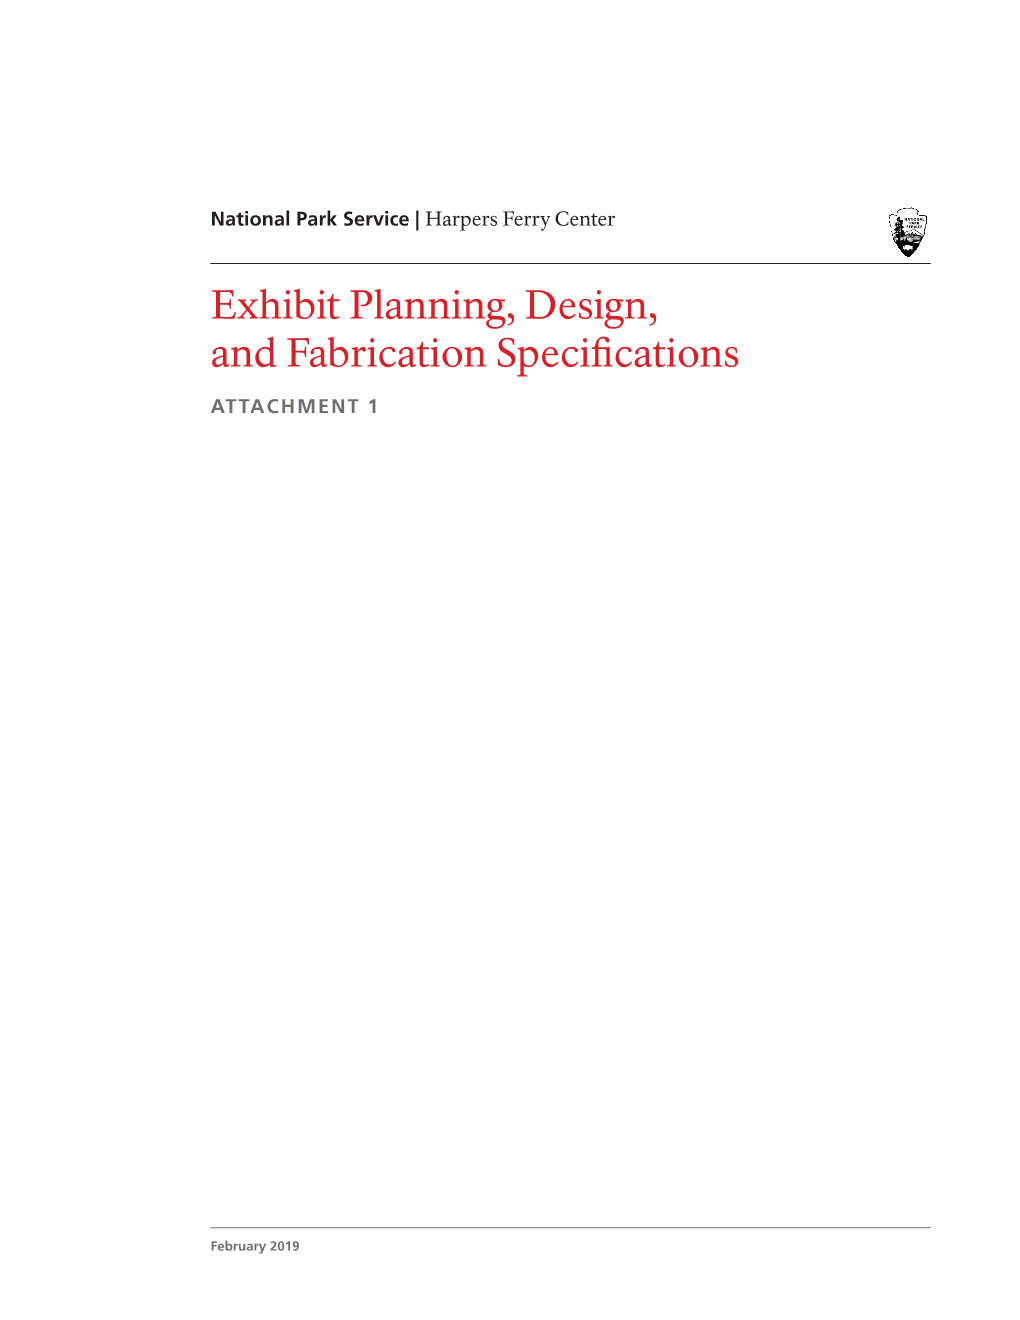 Exhibit Planning, Design, and Fabrication Specifications